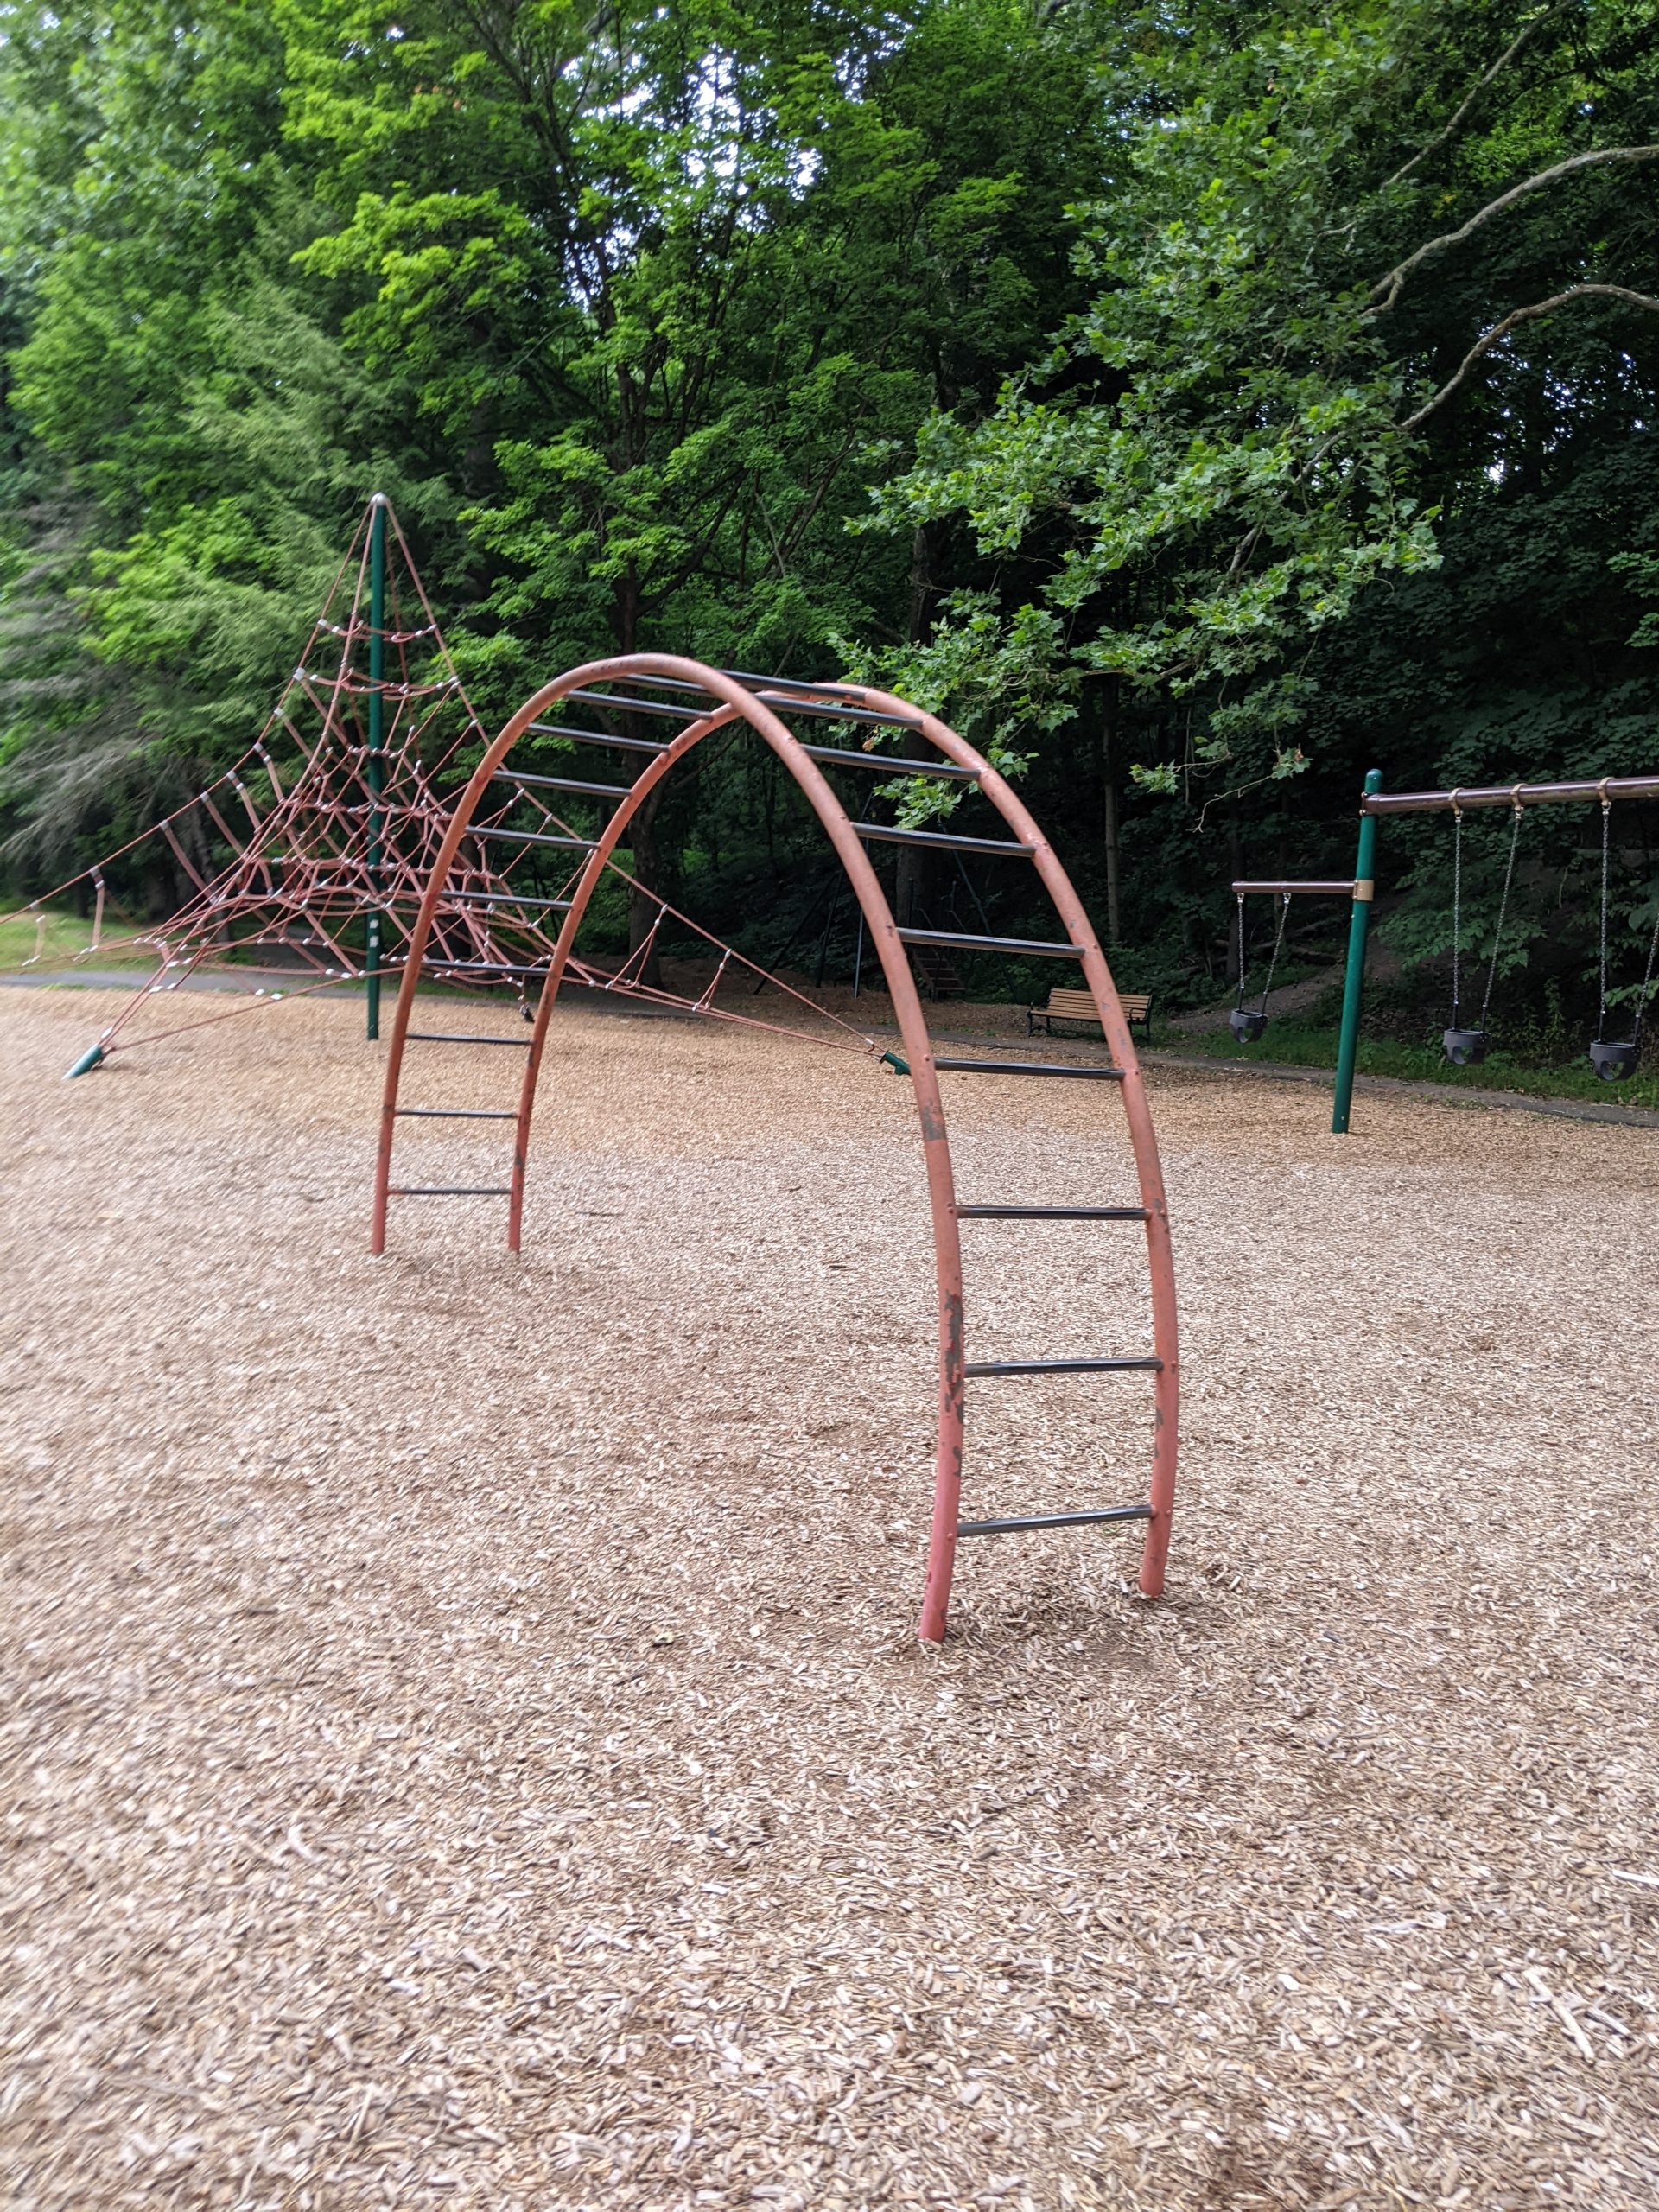 Frenchtown Boro Park Playground in Frenchtown, NJ Special Feature 